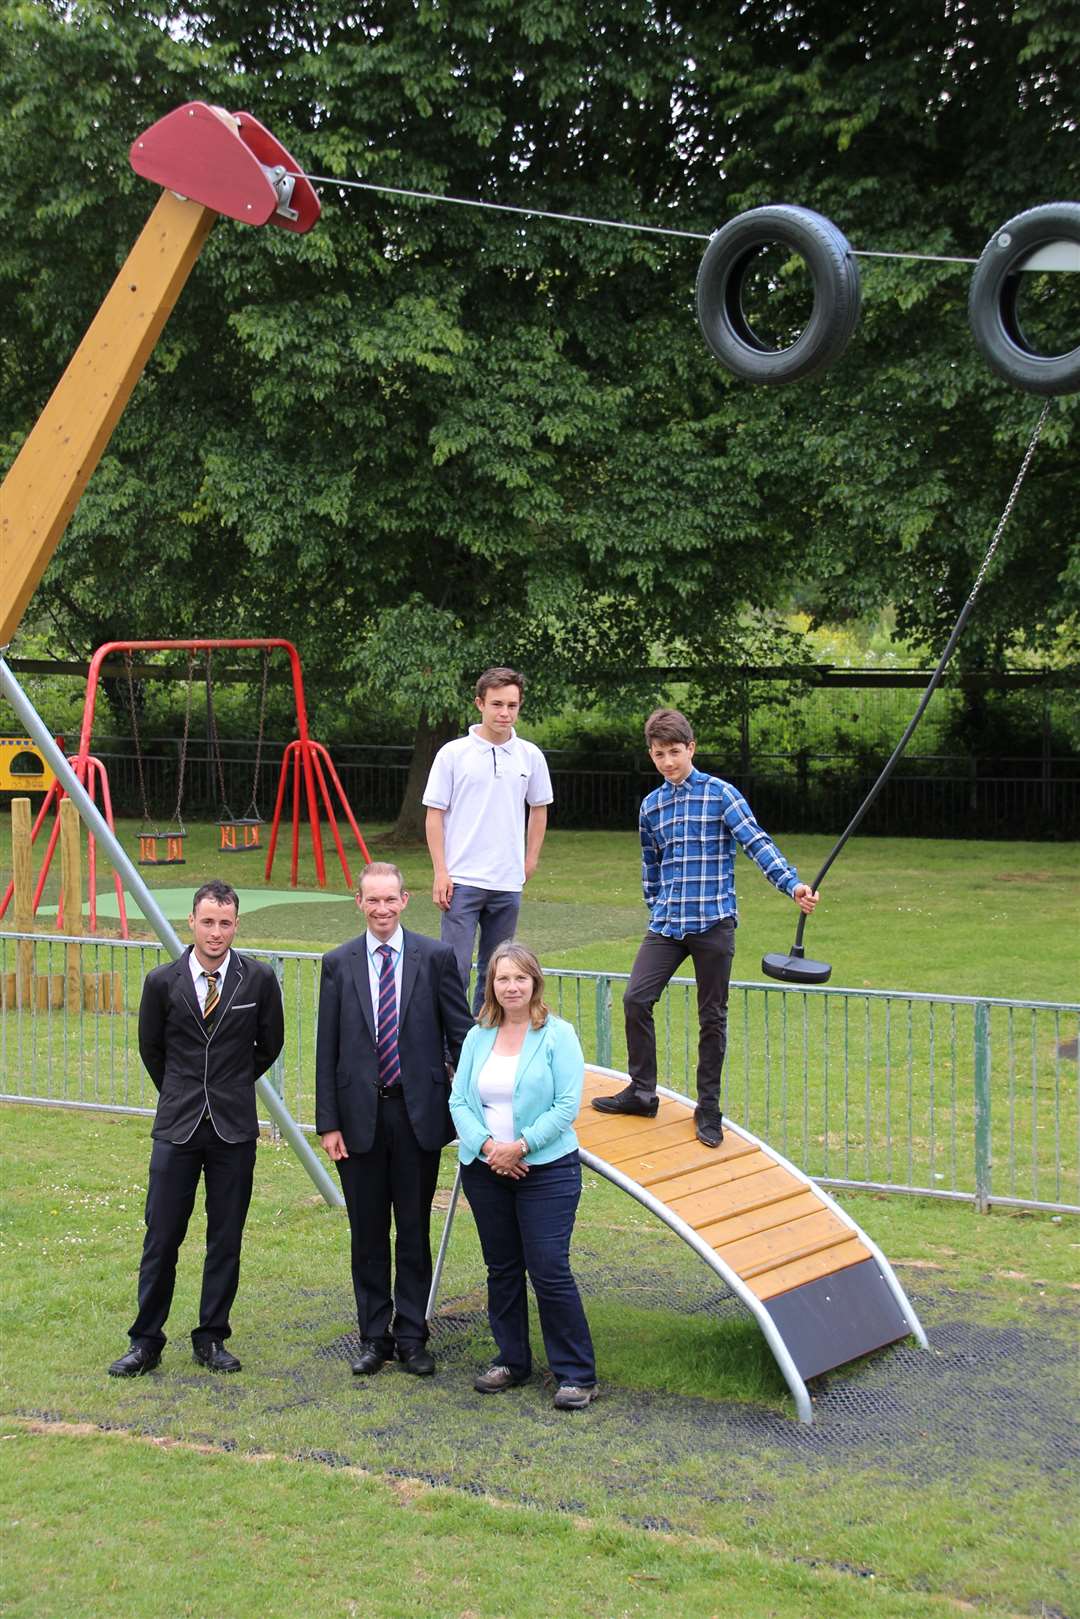 New equipment worth £13,000 installed at The Butts playground by Dover District Council